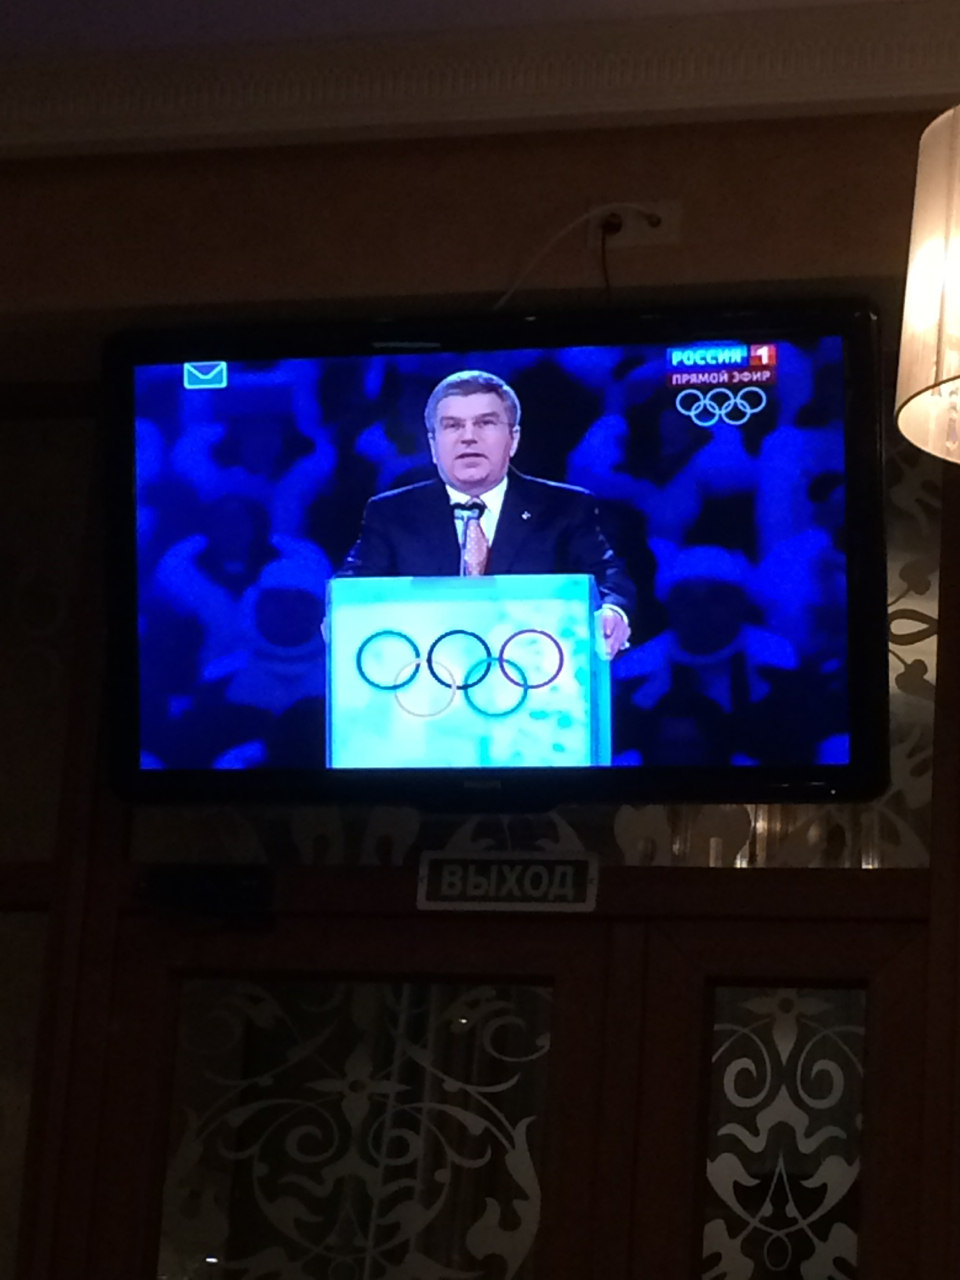 We were in Sochi for the Opening Ceremonies but we didn't have tickets. It was a lot of fun to sit in a cafe with all Russians watching the ceremonies on TV.